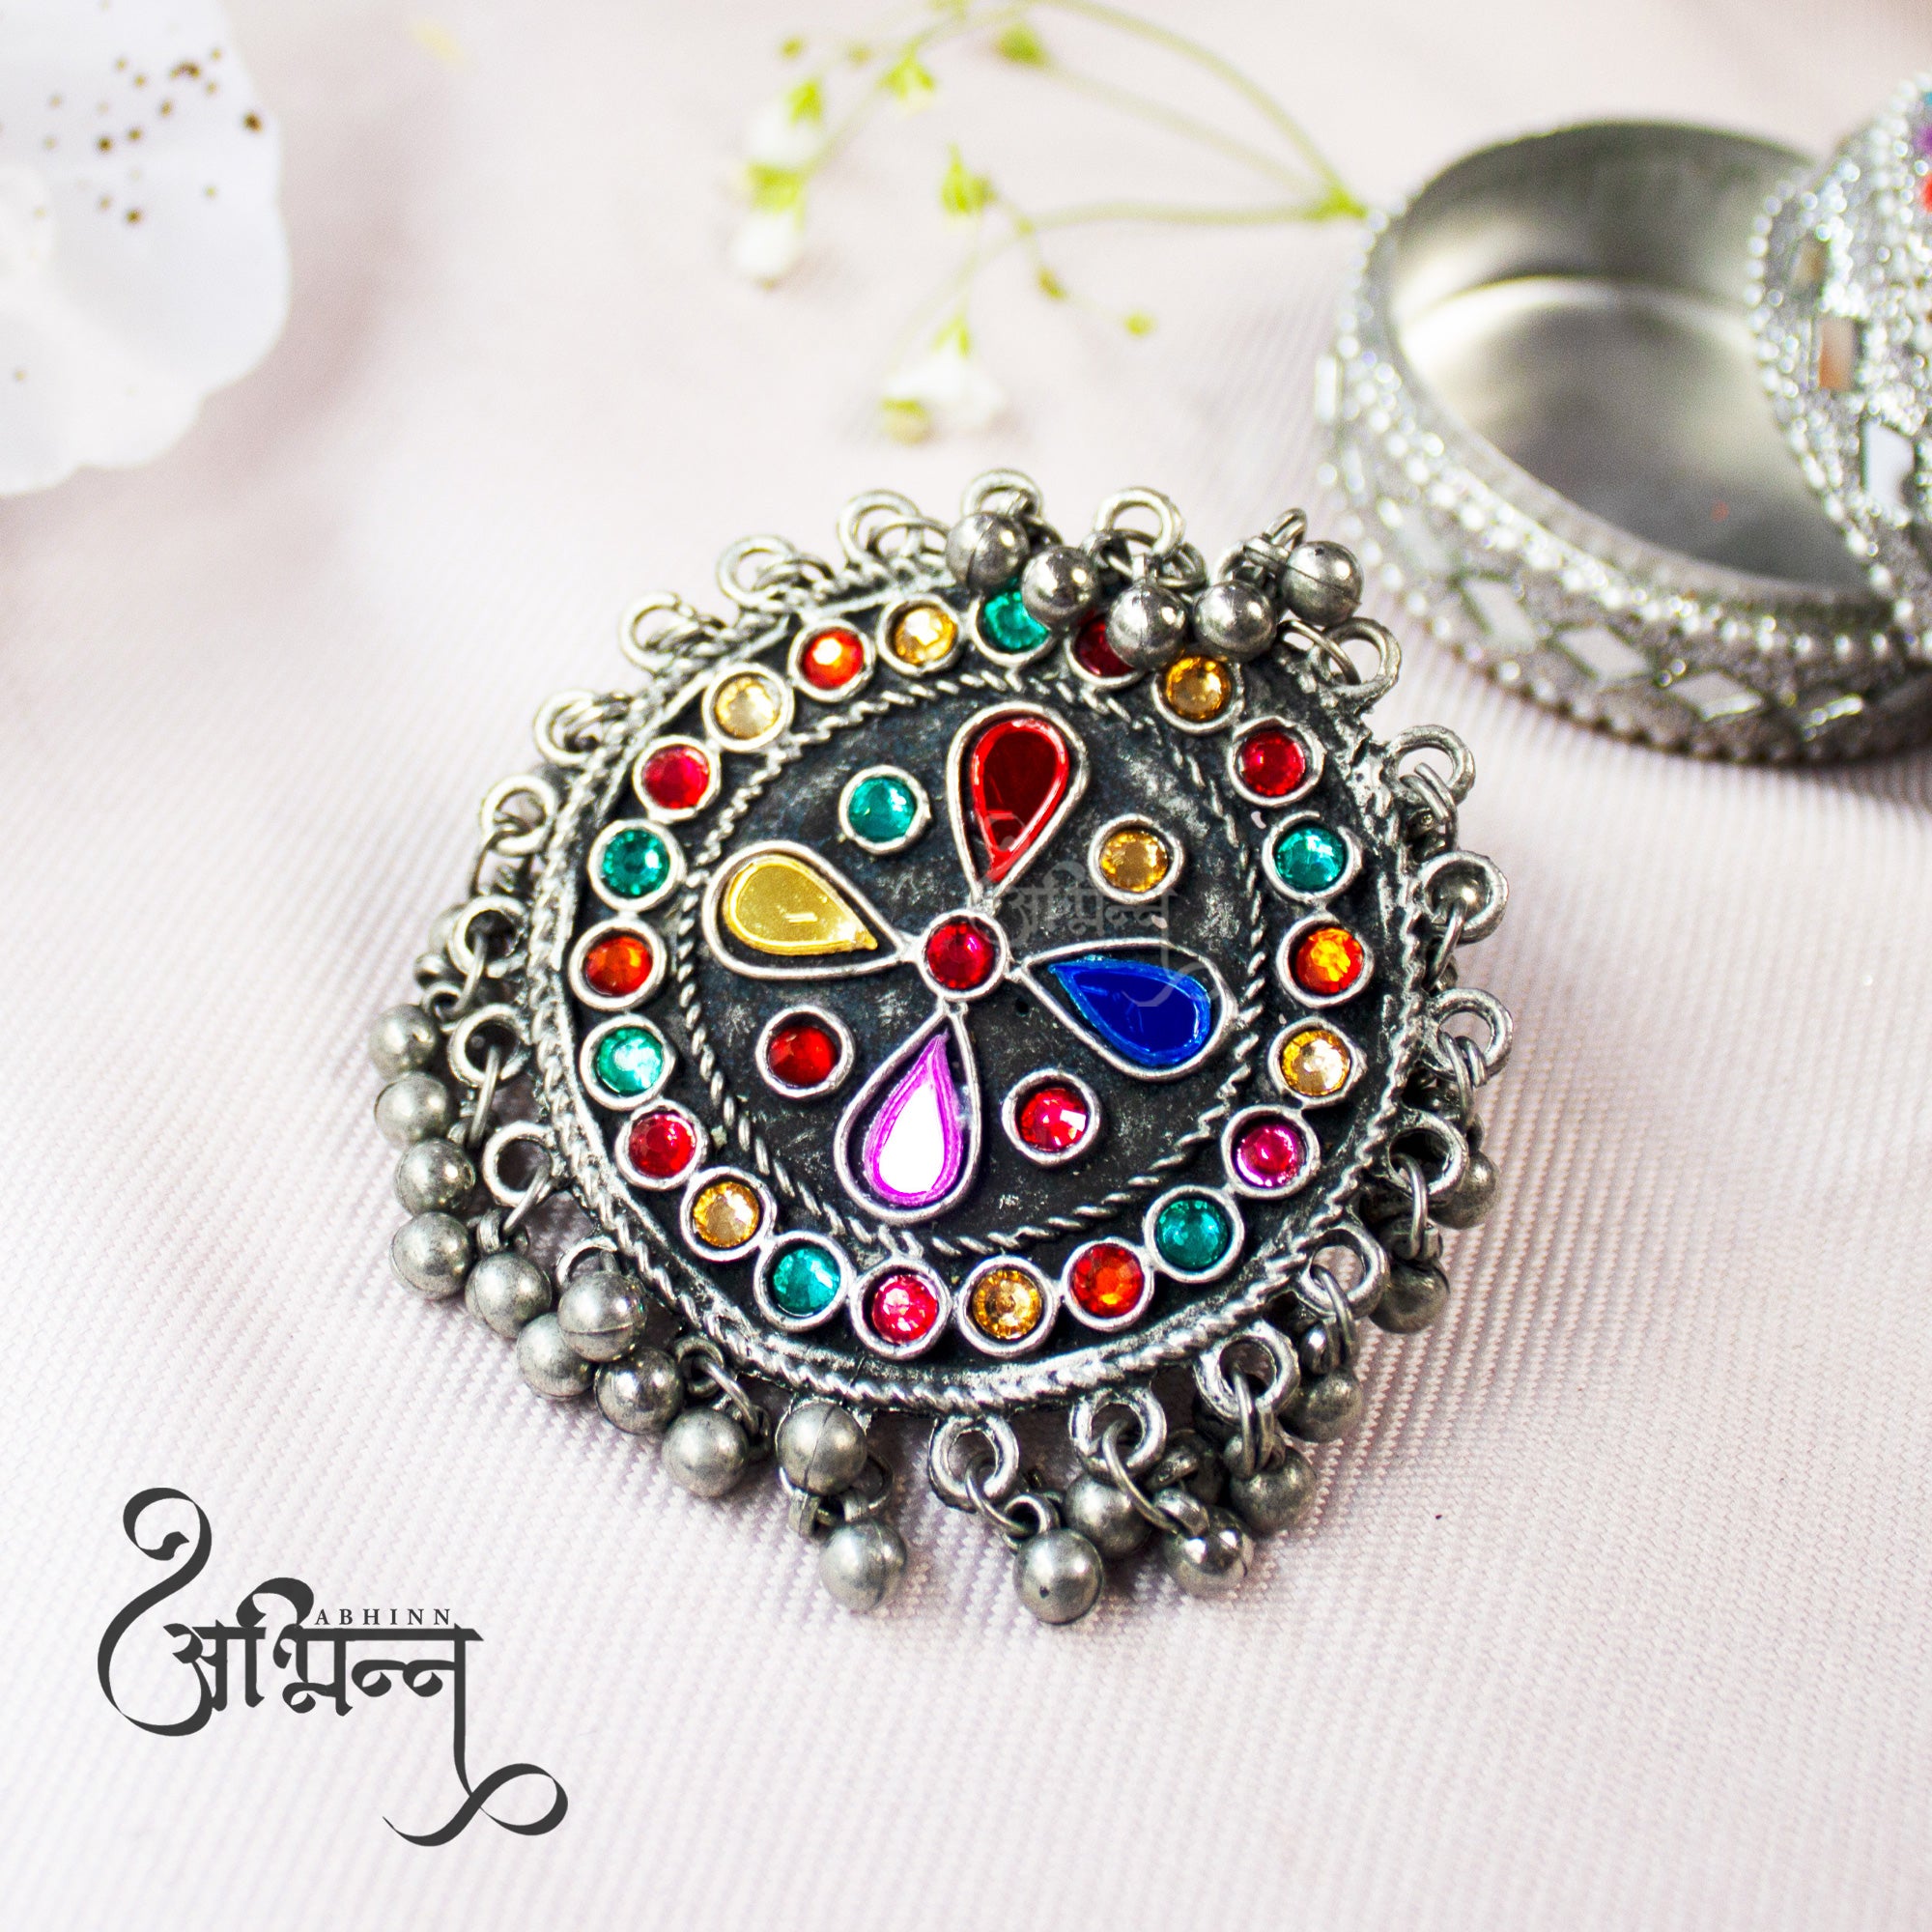 Abhinn Silver Oxidised Floral Design Multi Colour With Silver Beads Ring For Women